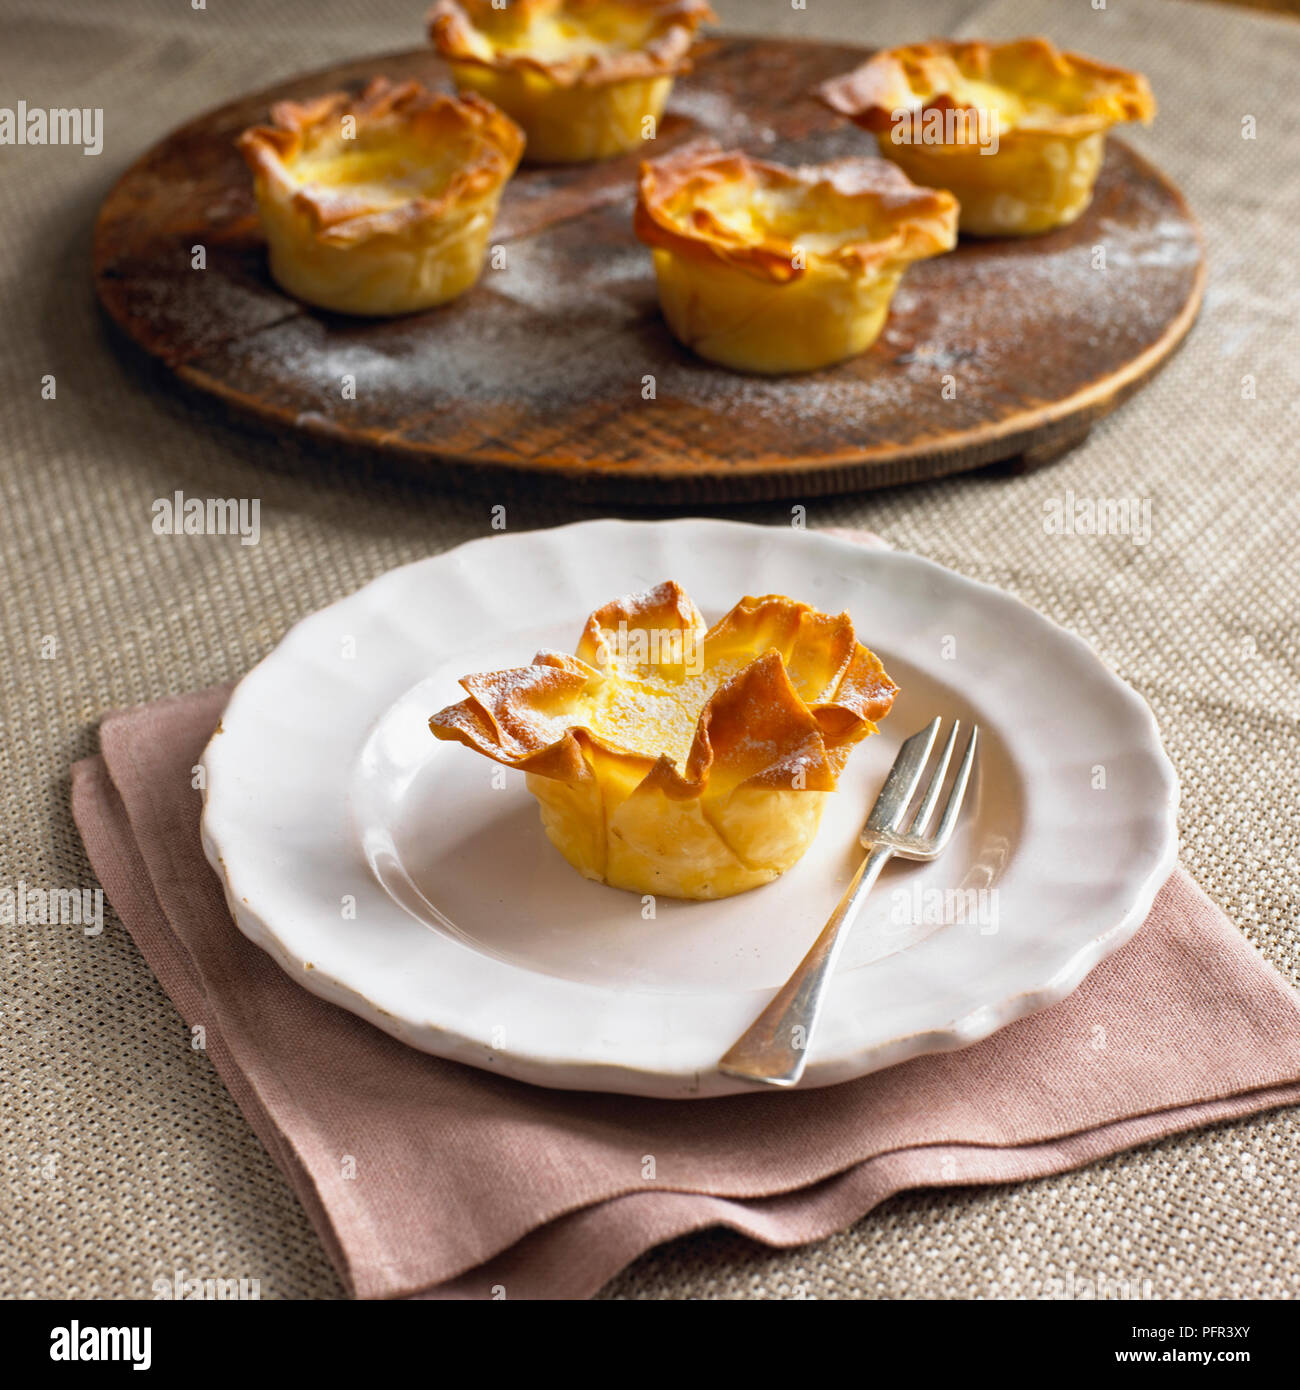 Cardamom custard filo tartlet on plate, with dessert fork, more tartlets on wooden board in the background Stock Photo